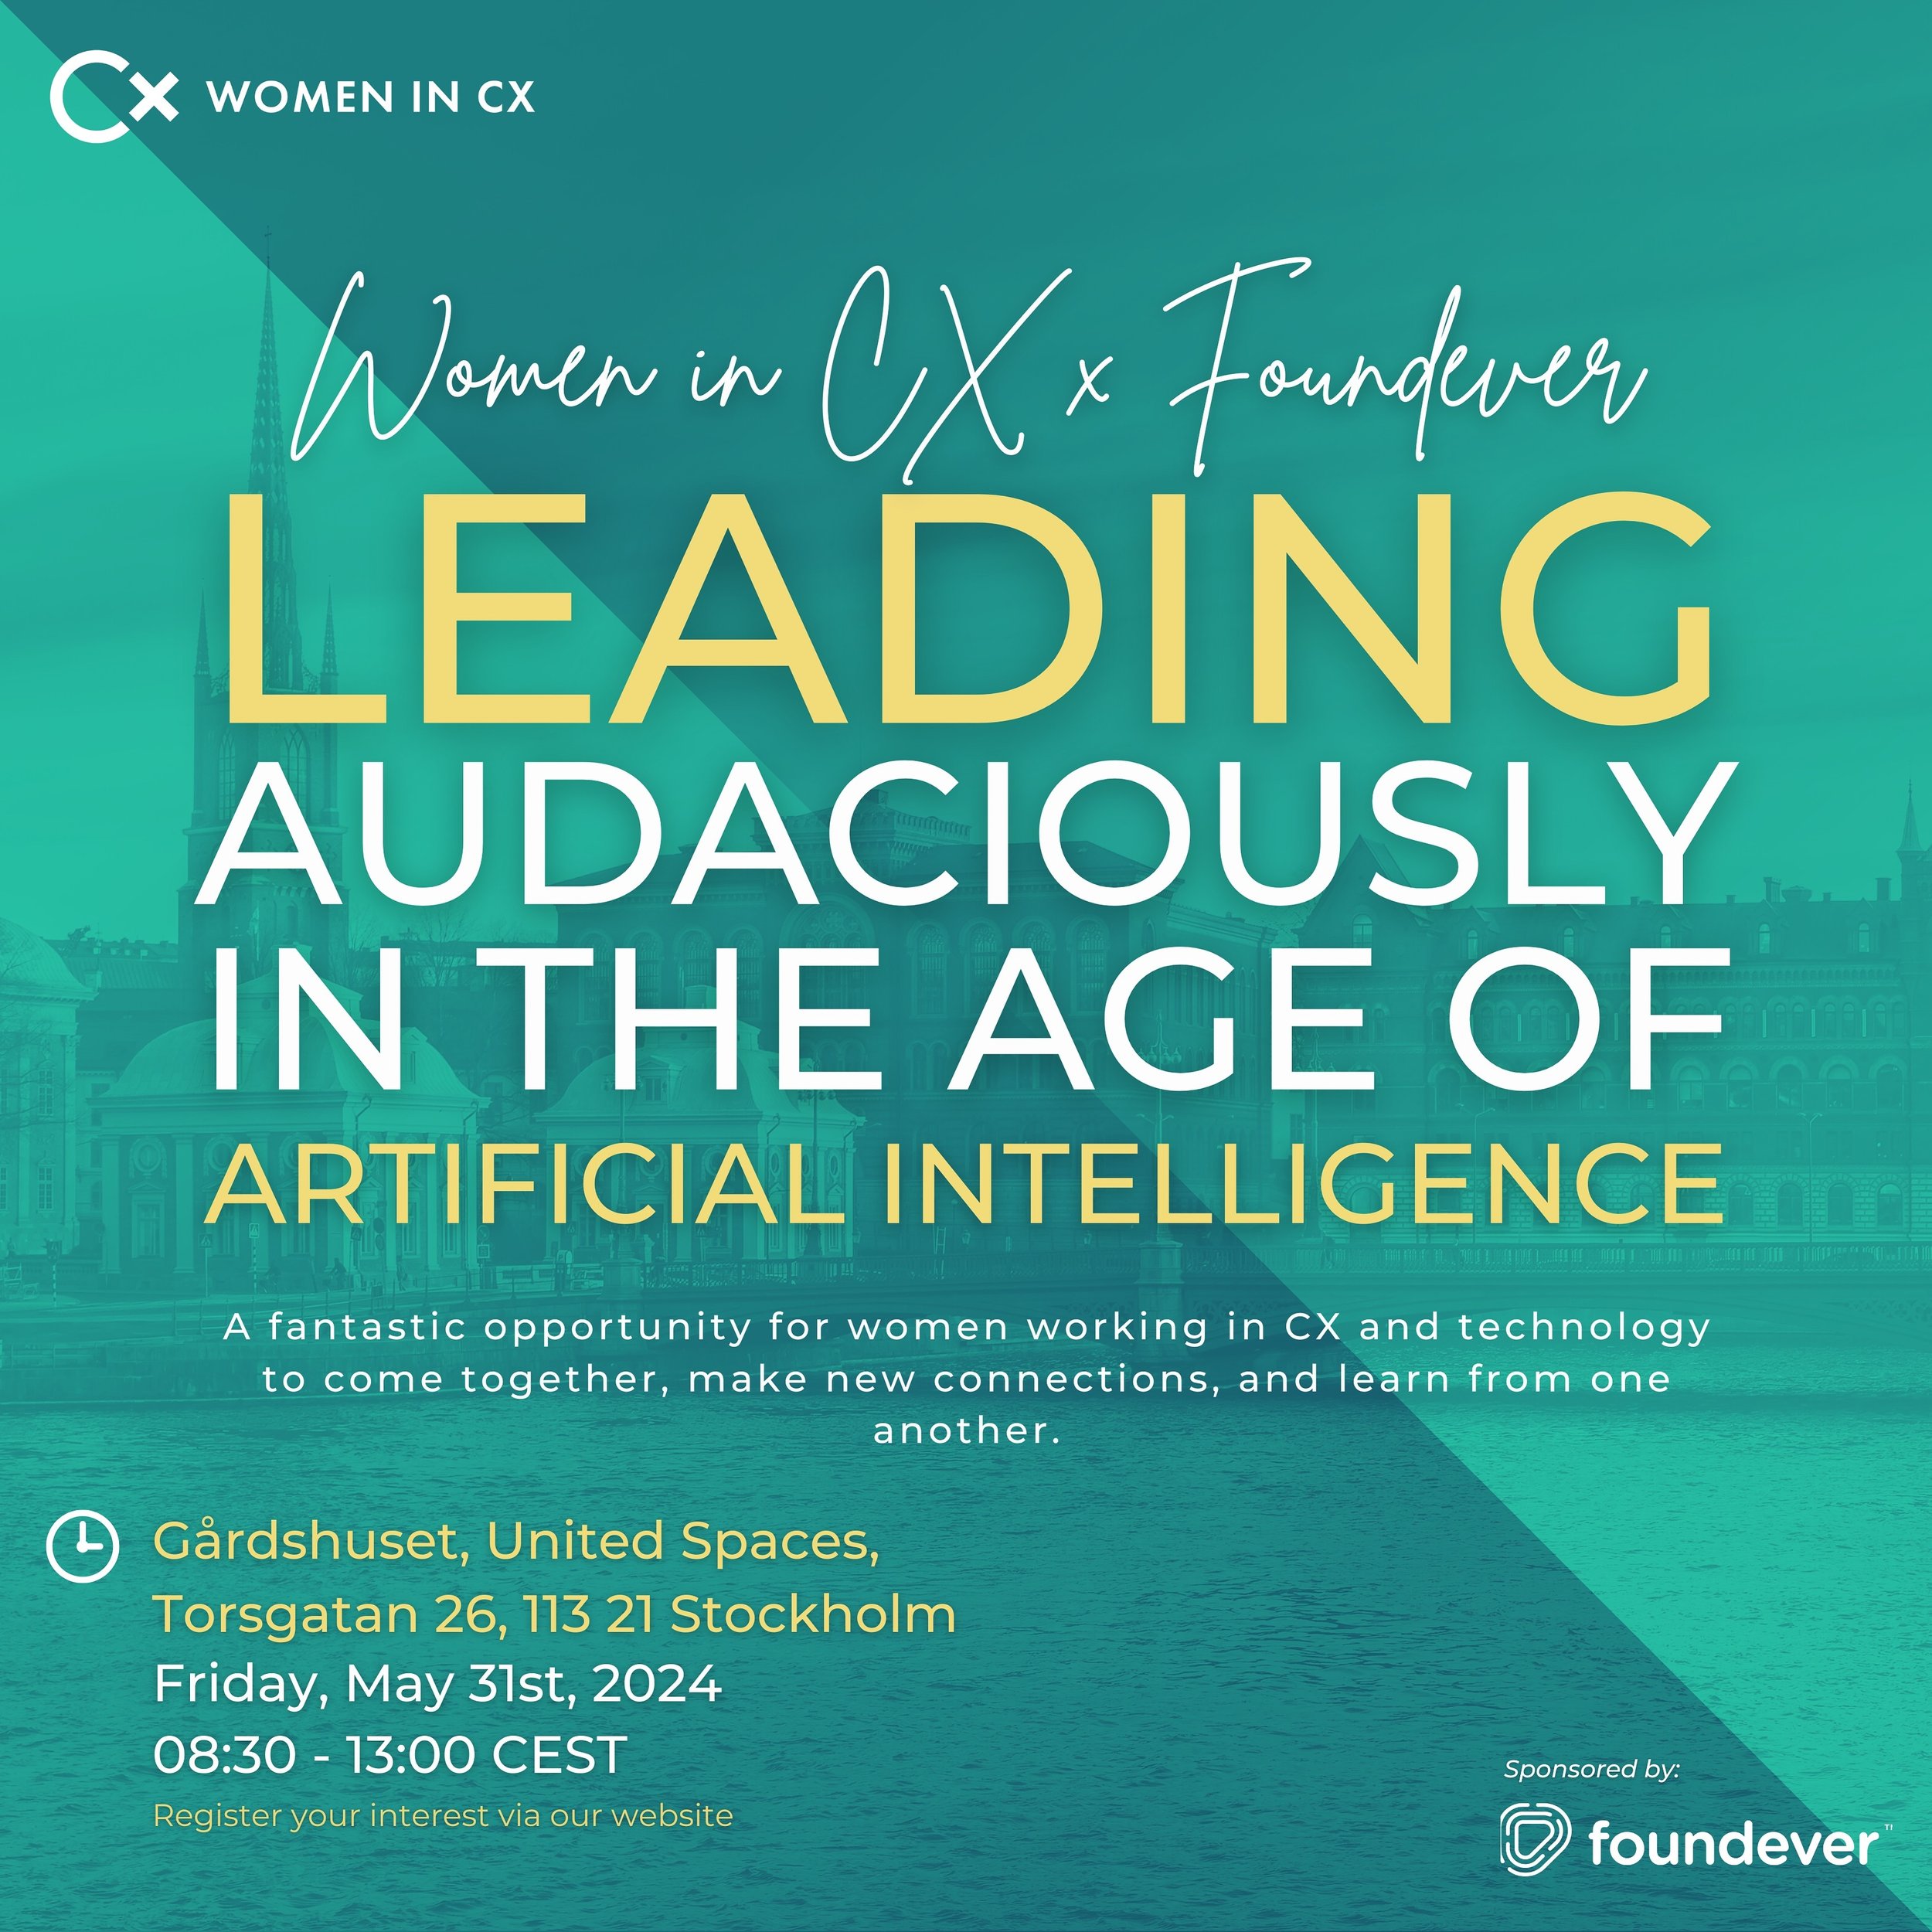 Are you ready to cut through the AI hype? 🗯️
&nbsp;
With just 2 weeks until our event, &lsquo;Leading Audaciously in the Age of AI&rsquo;, in collaboration with Foundever, don&rsquo;t delay if you&rsquo;d like to come along and join us!
&nbsp;
Uniti